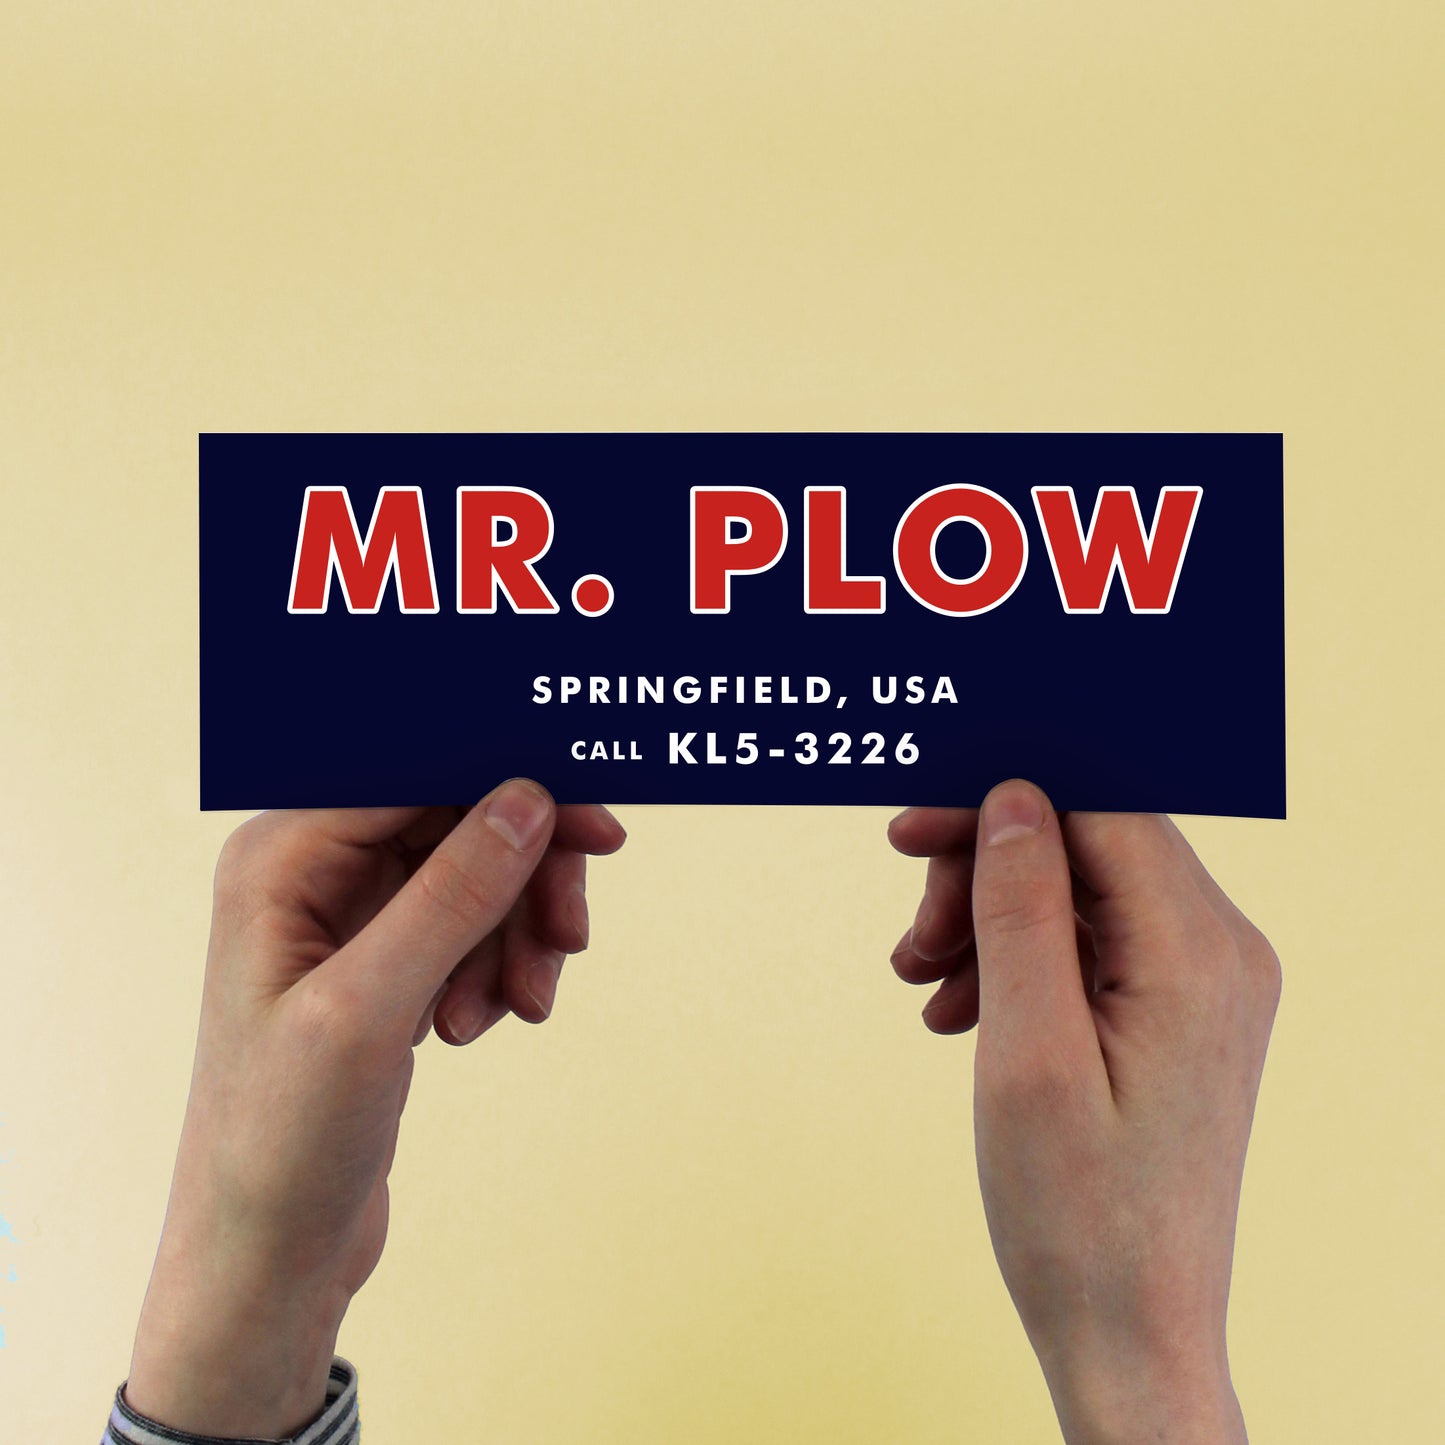 Mr Plow Bumper Sticker “Call Mr. Plow, That's my name. That name again is Mr. Plow!”